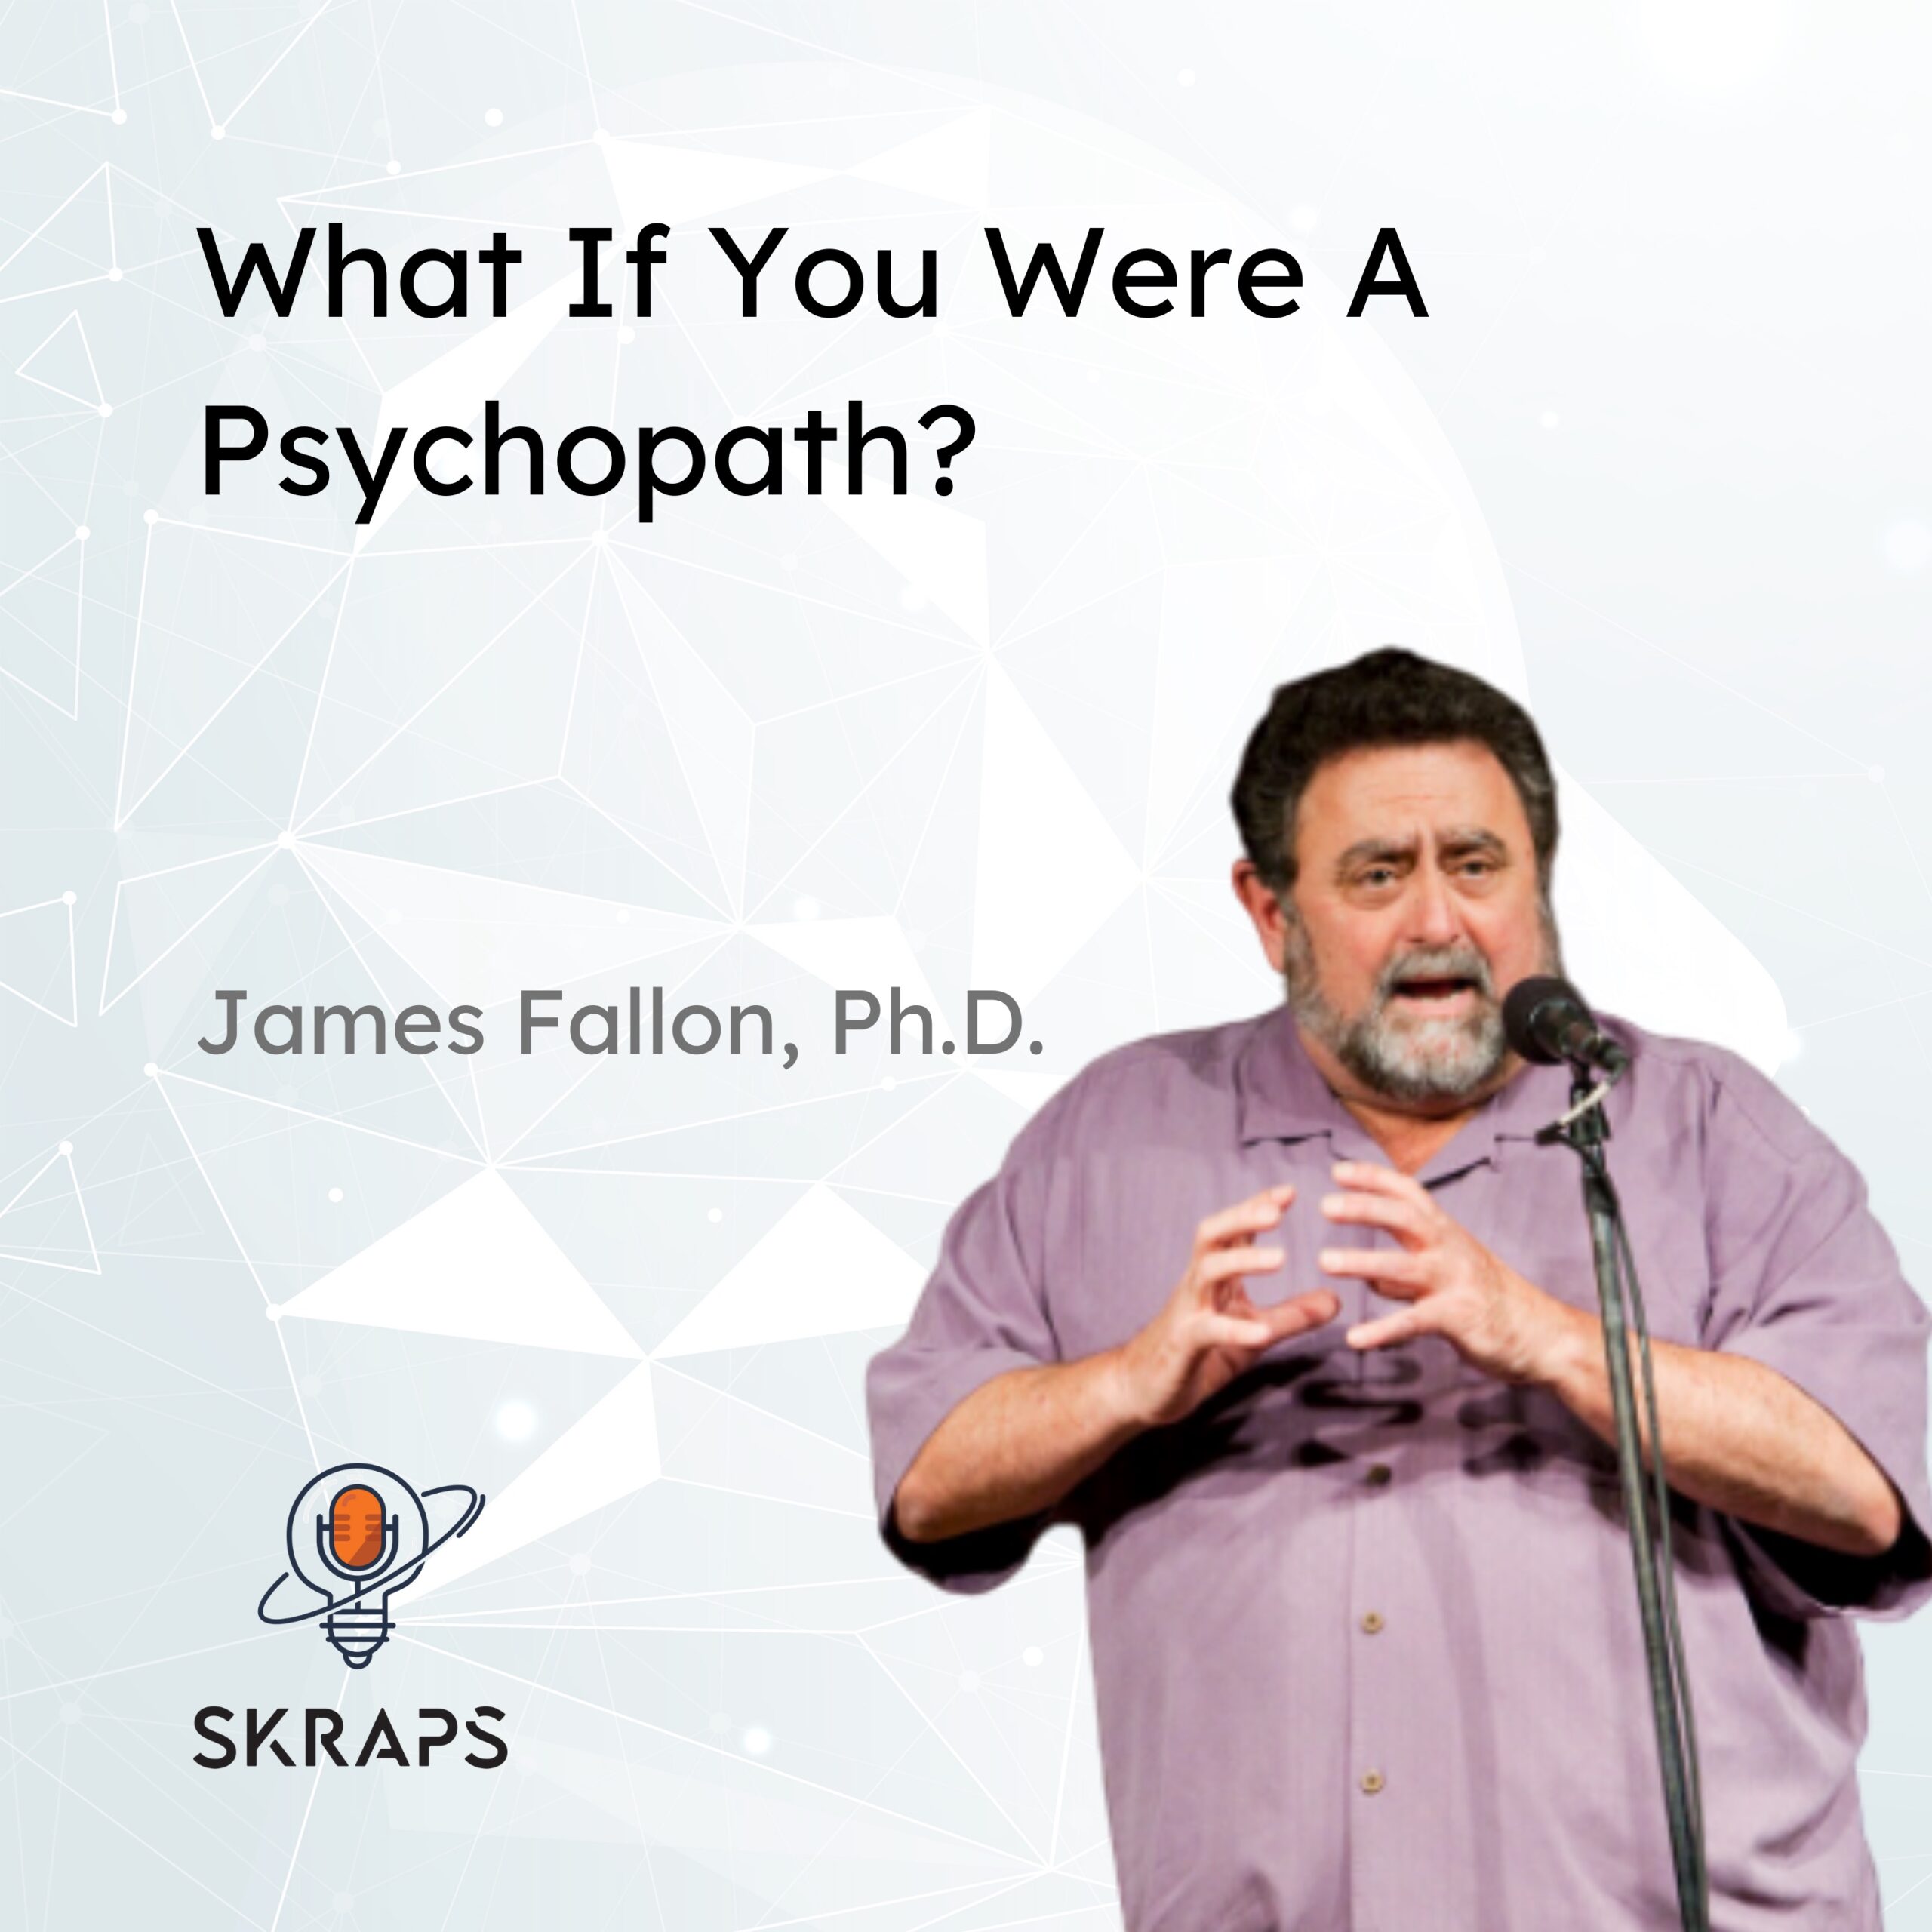 What if you were a Psychopath?